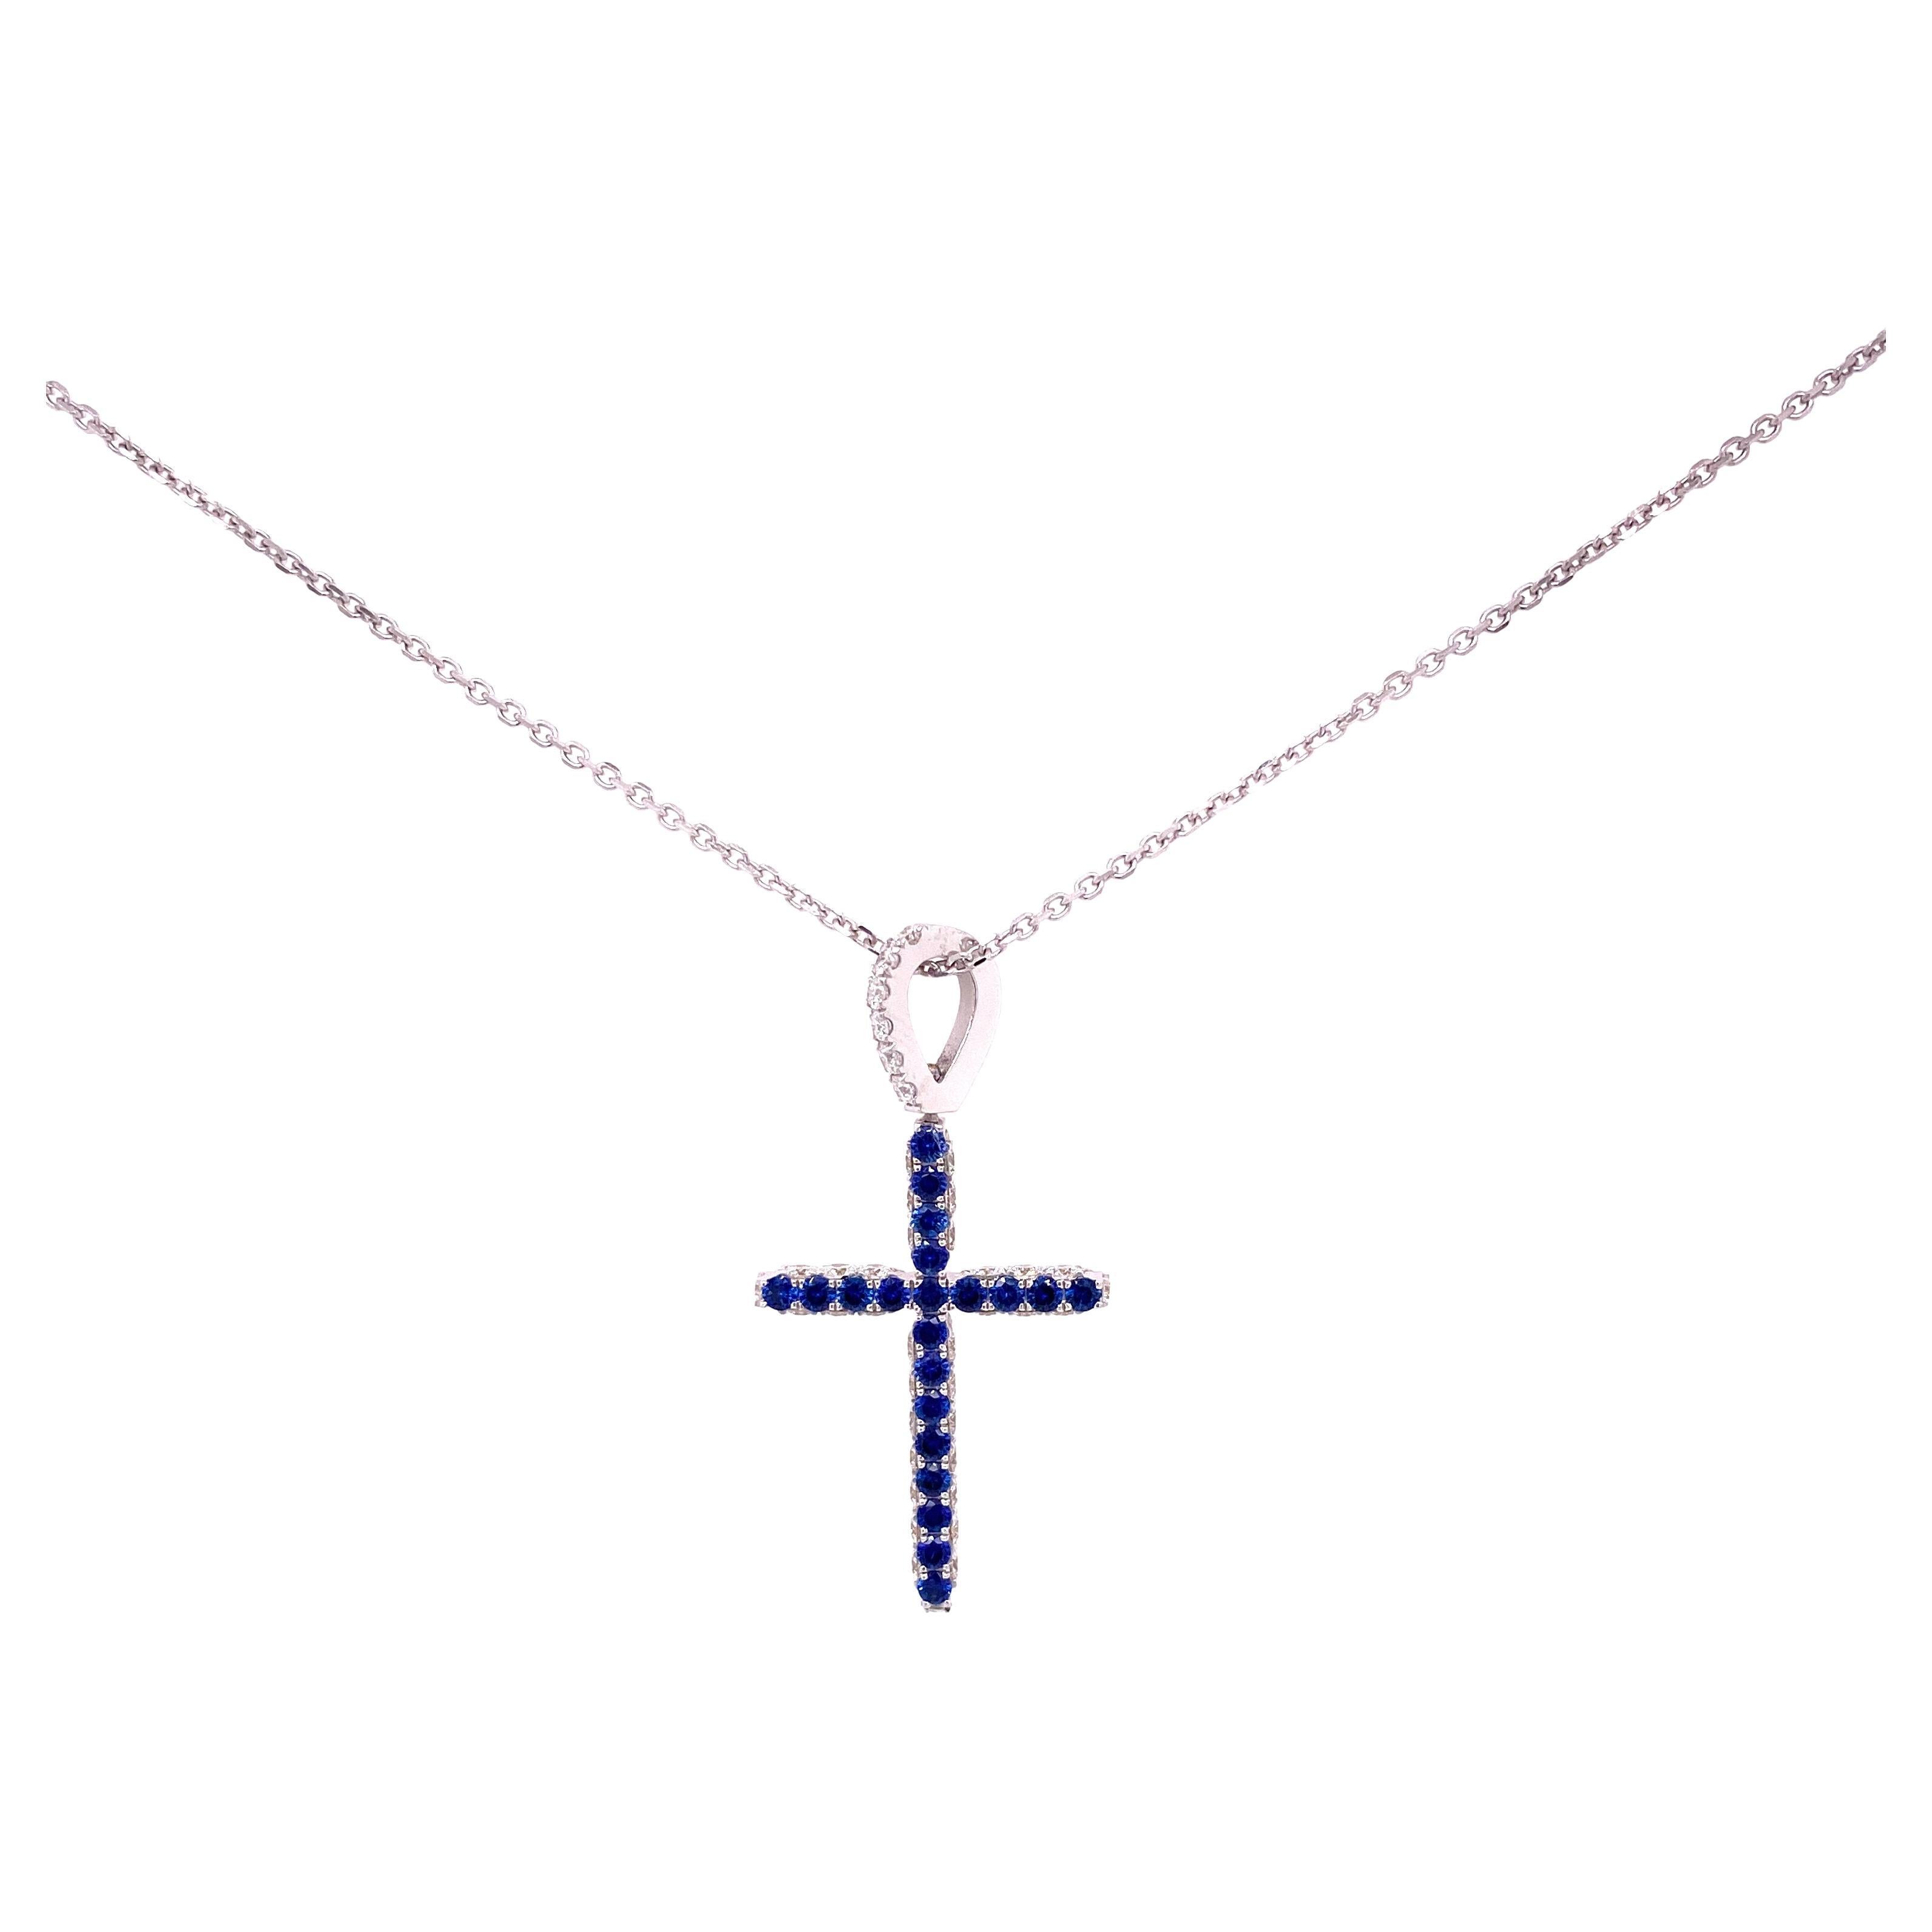 CROSS-4S - 18KW Cross Pendant with Diamonds & Sapphire along with 18KW 16” Chain For Sale